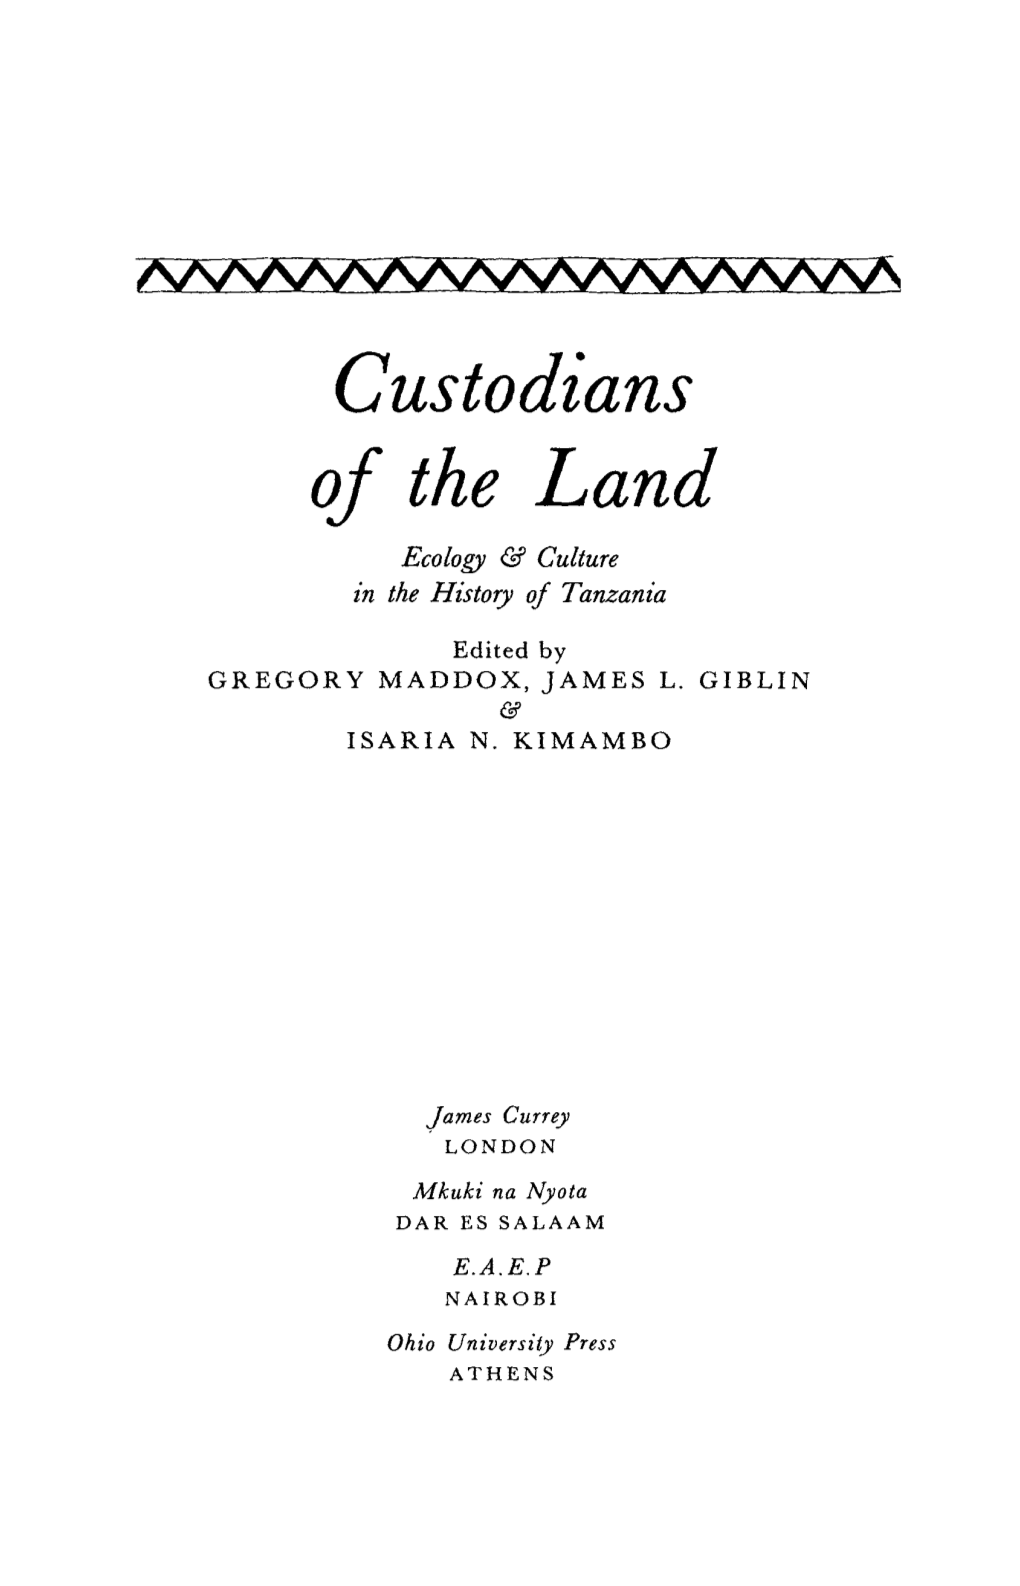 Custodians of the Land Ecology & Culture in the History of Tanzania JAMES GIBLIN & GREGORY MADDOX